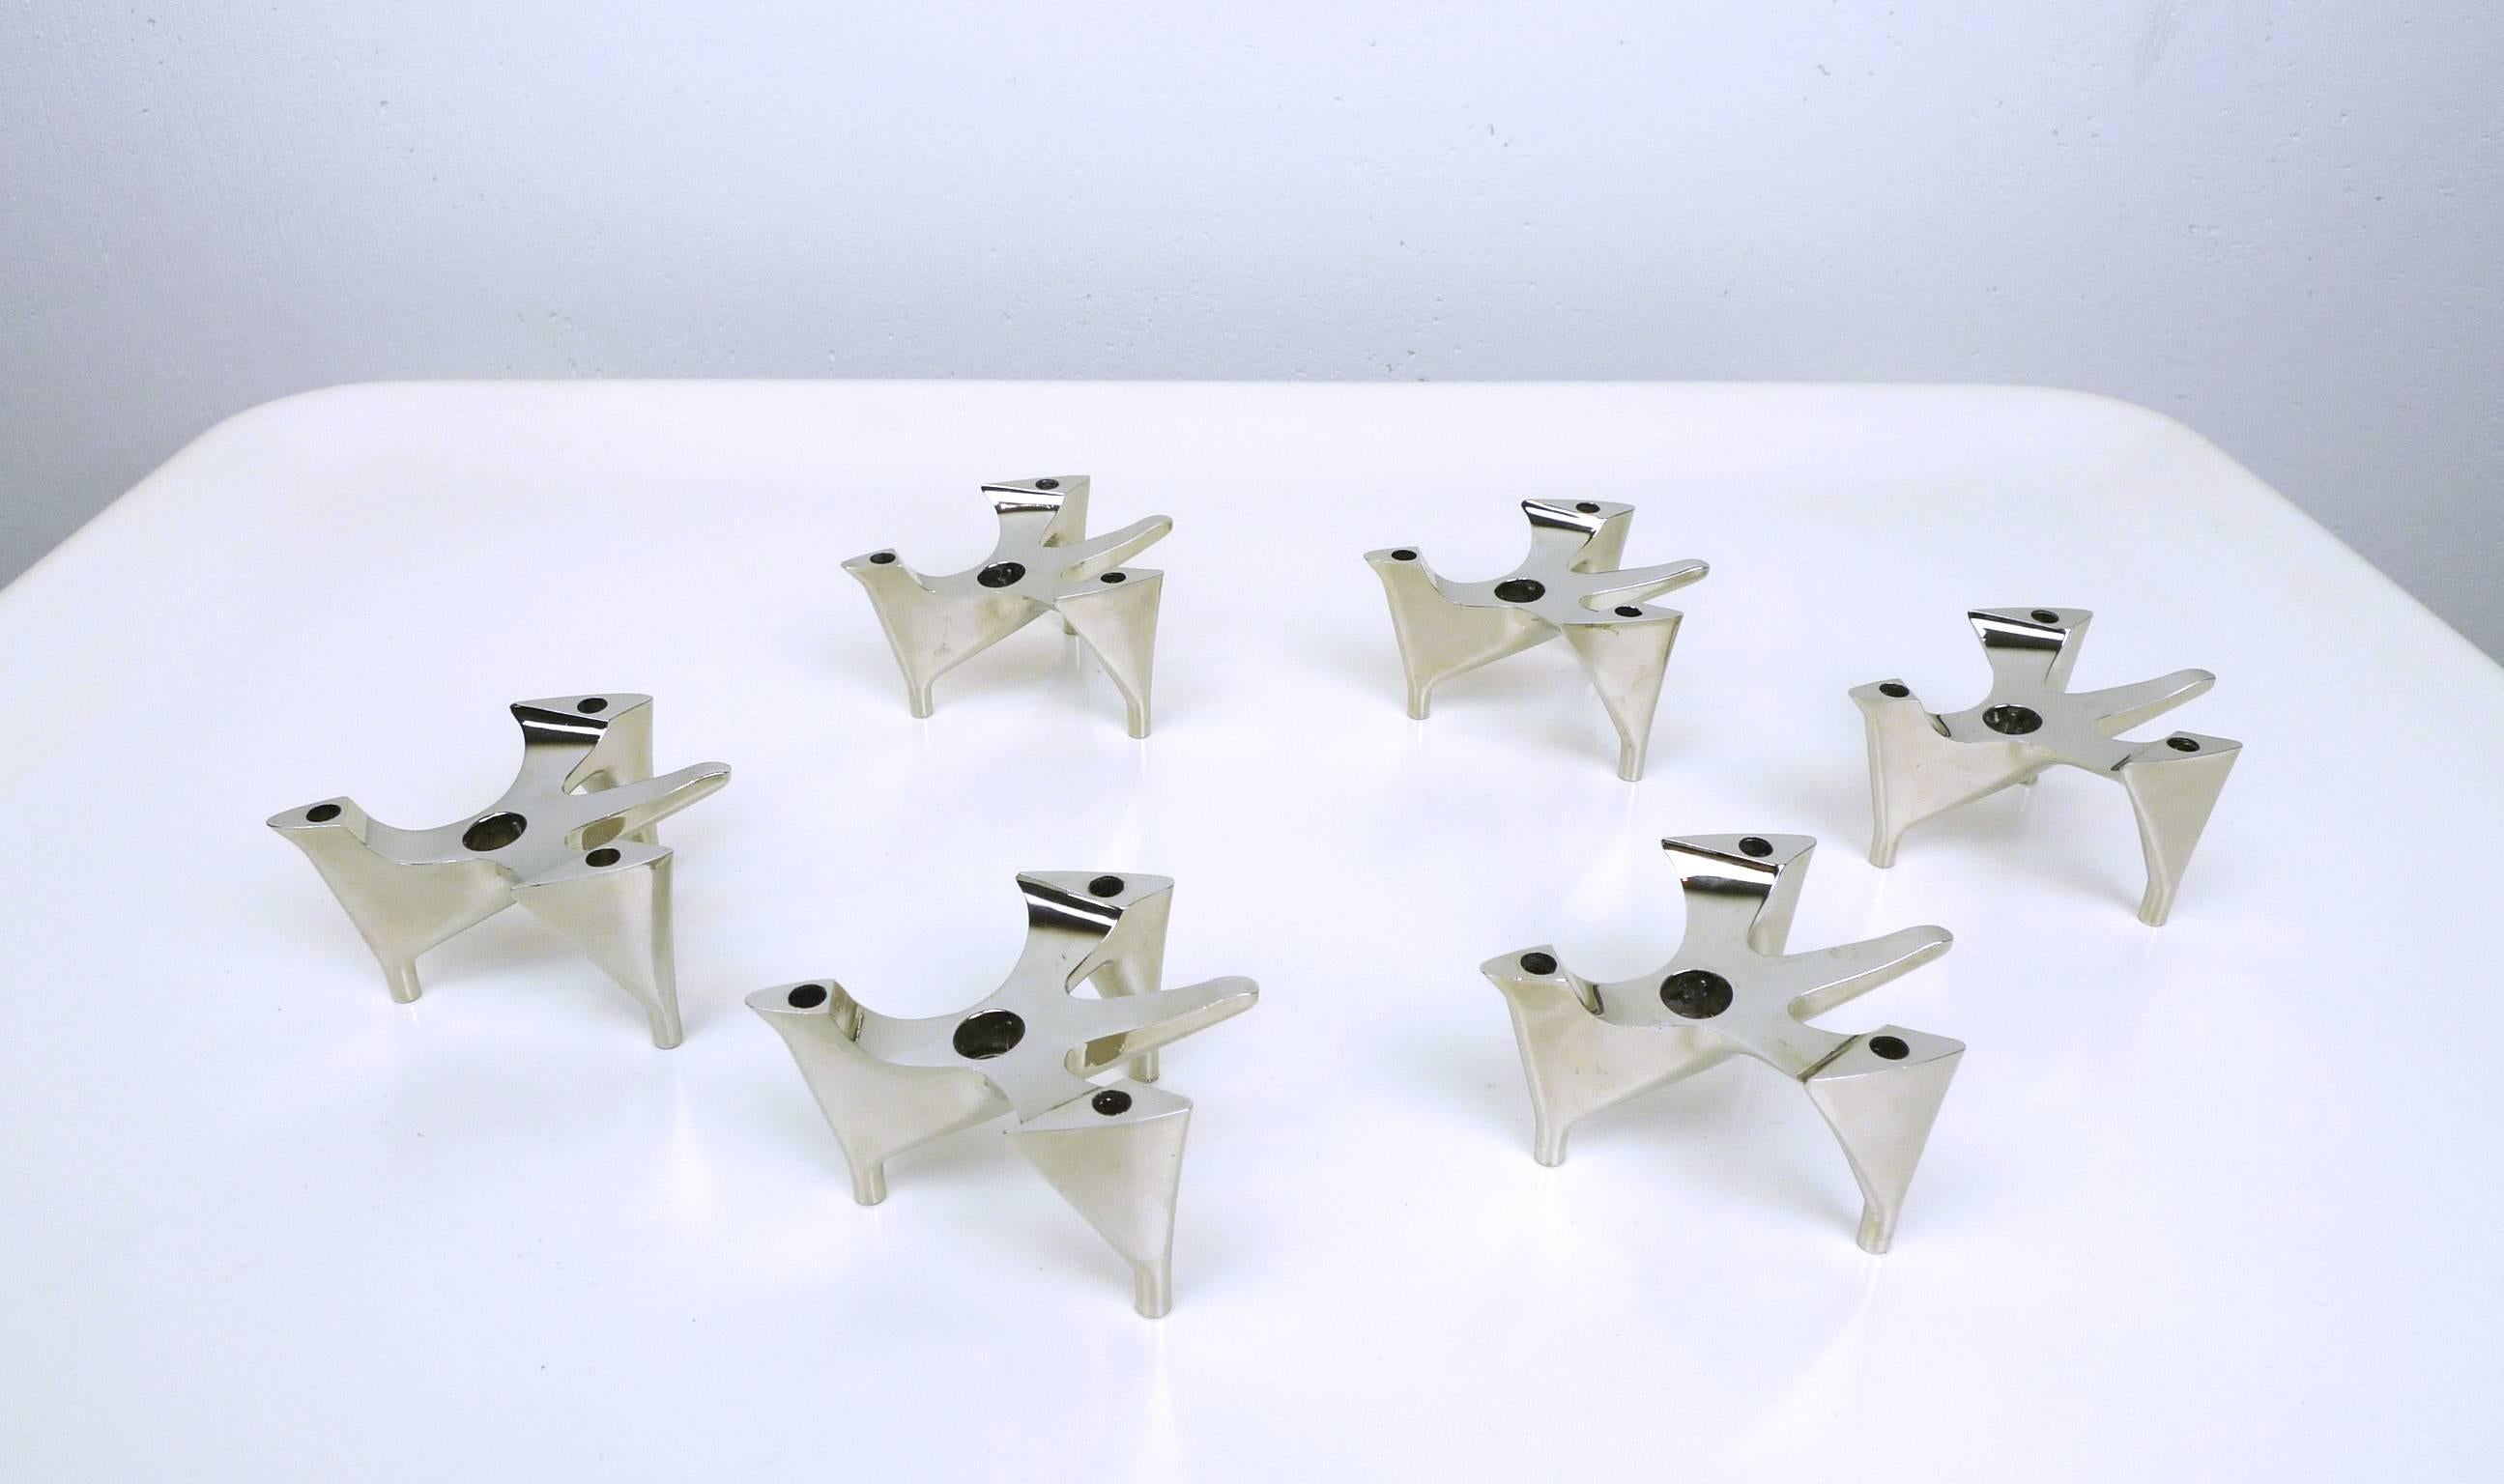 This set of six model Vogelflug (bird flight) candle holders is from the German manufacturer Hammonia Motard from the 1970s. The six individual candle holders can be configured in any way. The set is in very good condition.